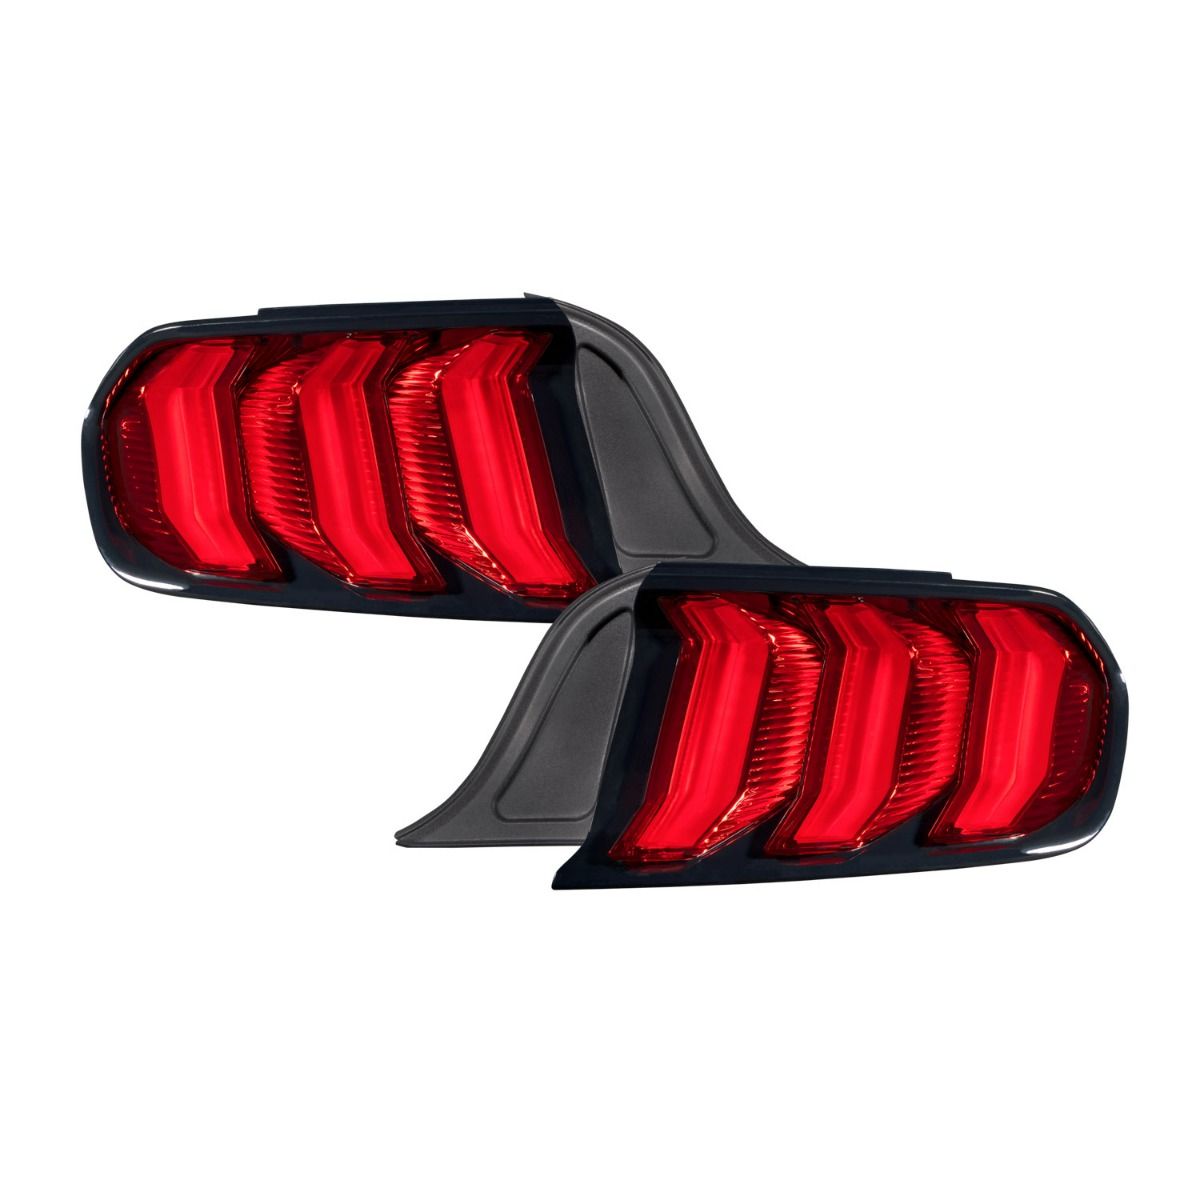 2015-2023 Ford Mustang LED TailLights Red, Clear, or Smoked Lens Pair Form Lighting - FL0006 FL0007 FL0008